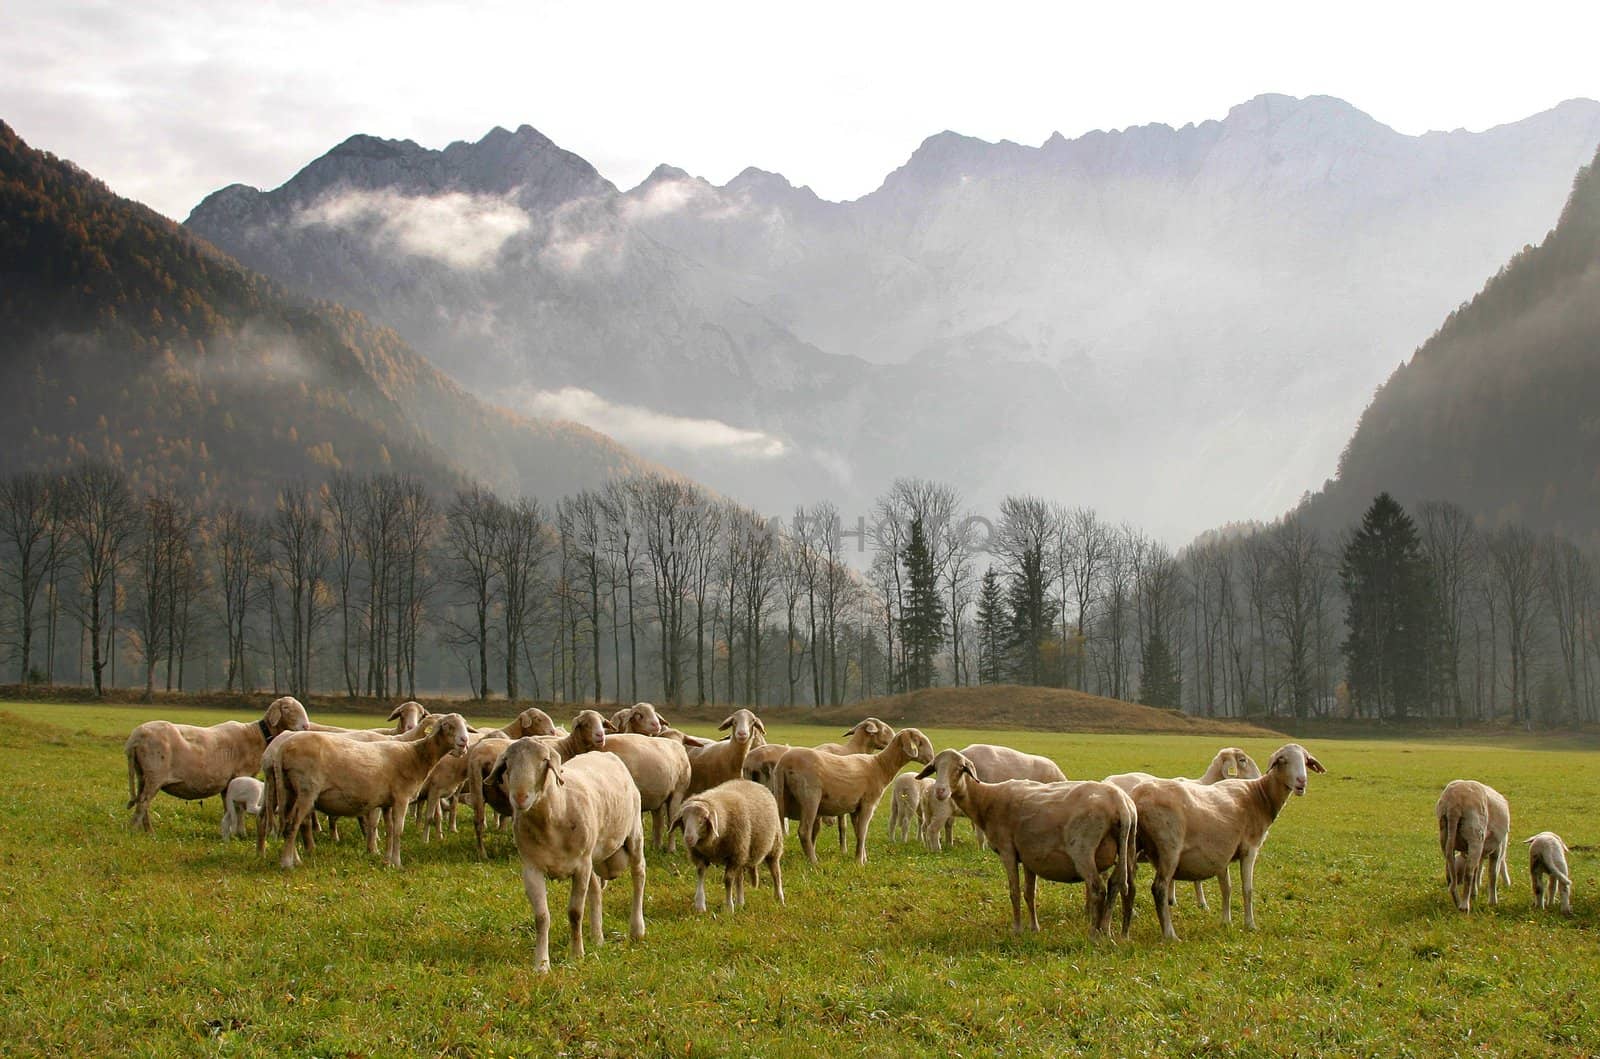 A herd of sheep. Mountains in the background